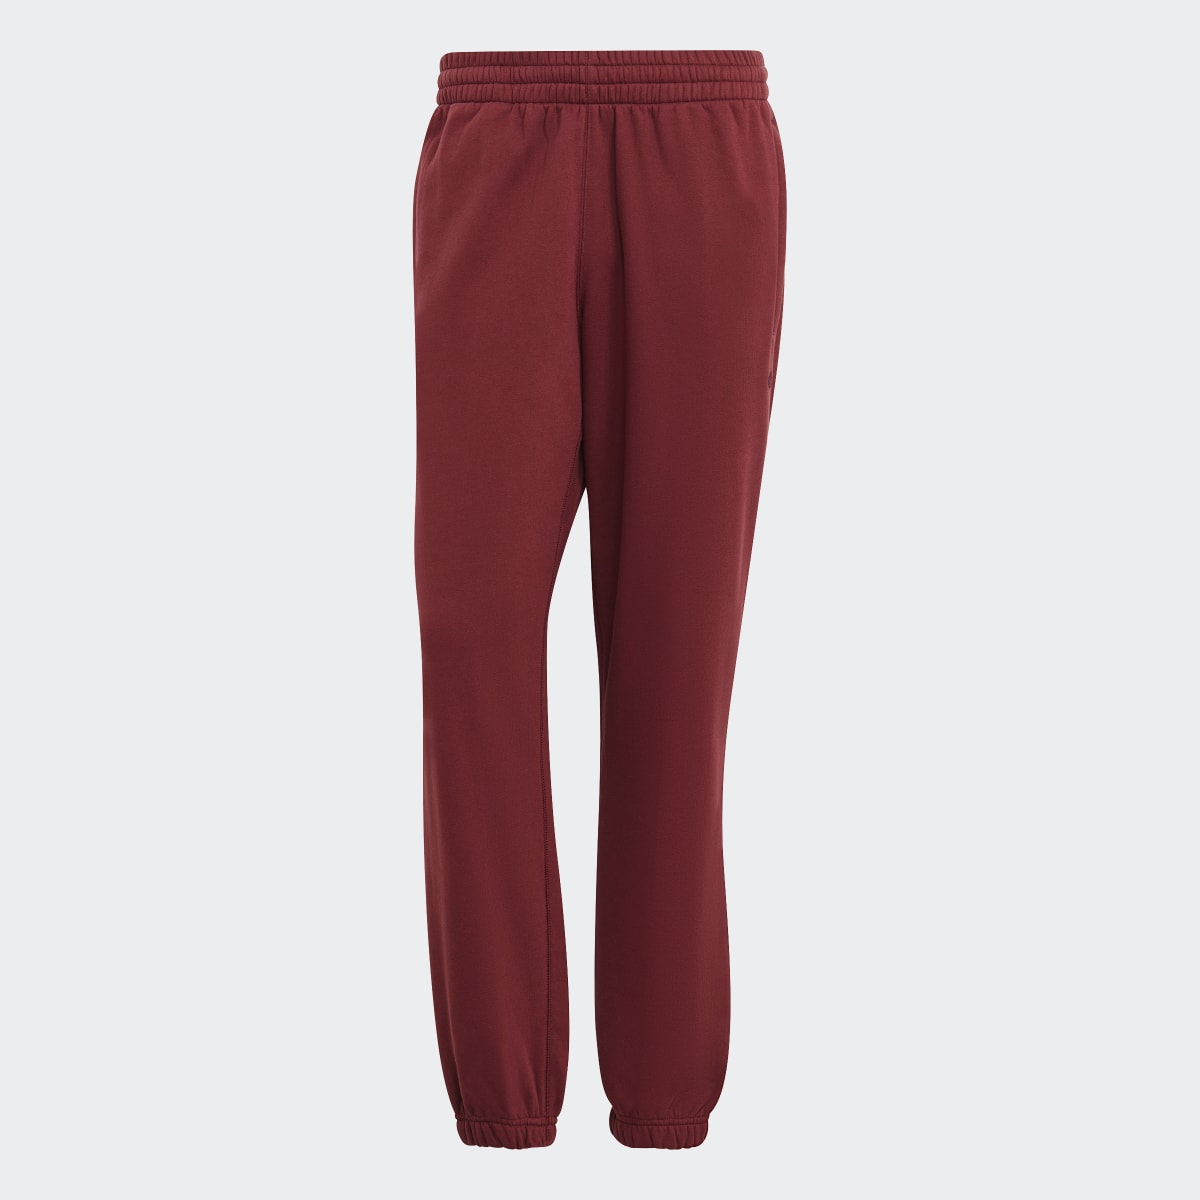 Adidas Adicolor Contempo French Terry Sweat Pants. 4